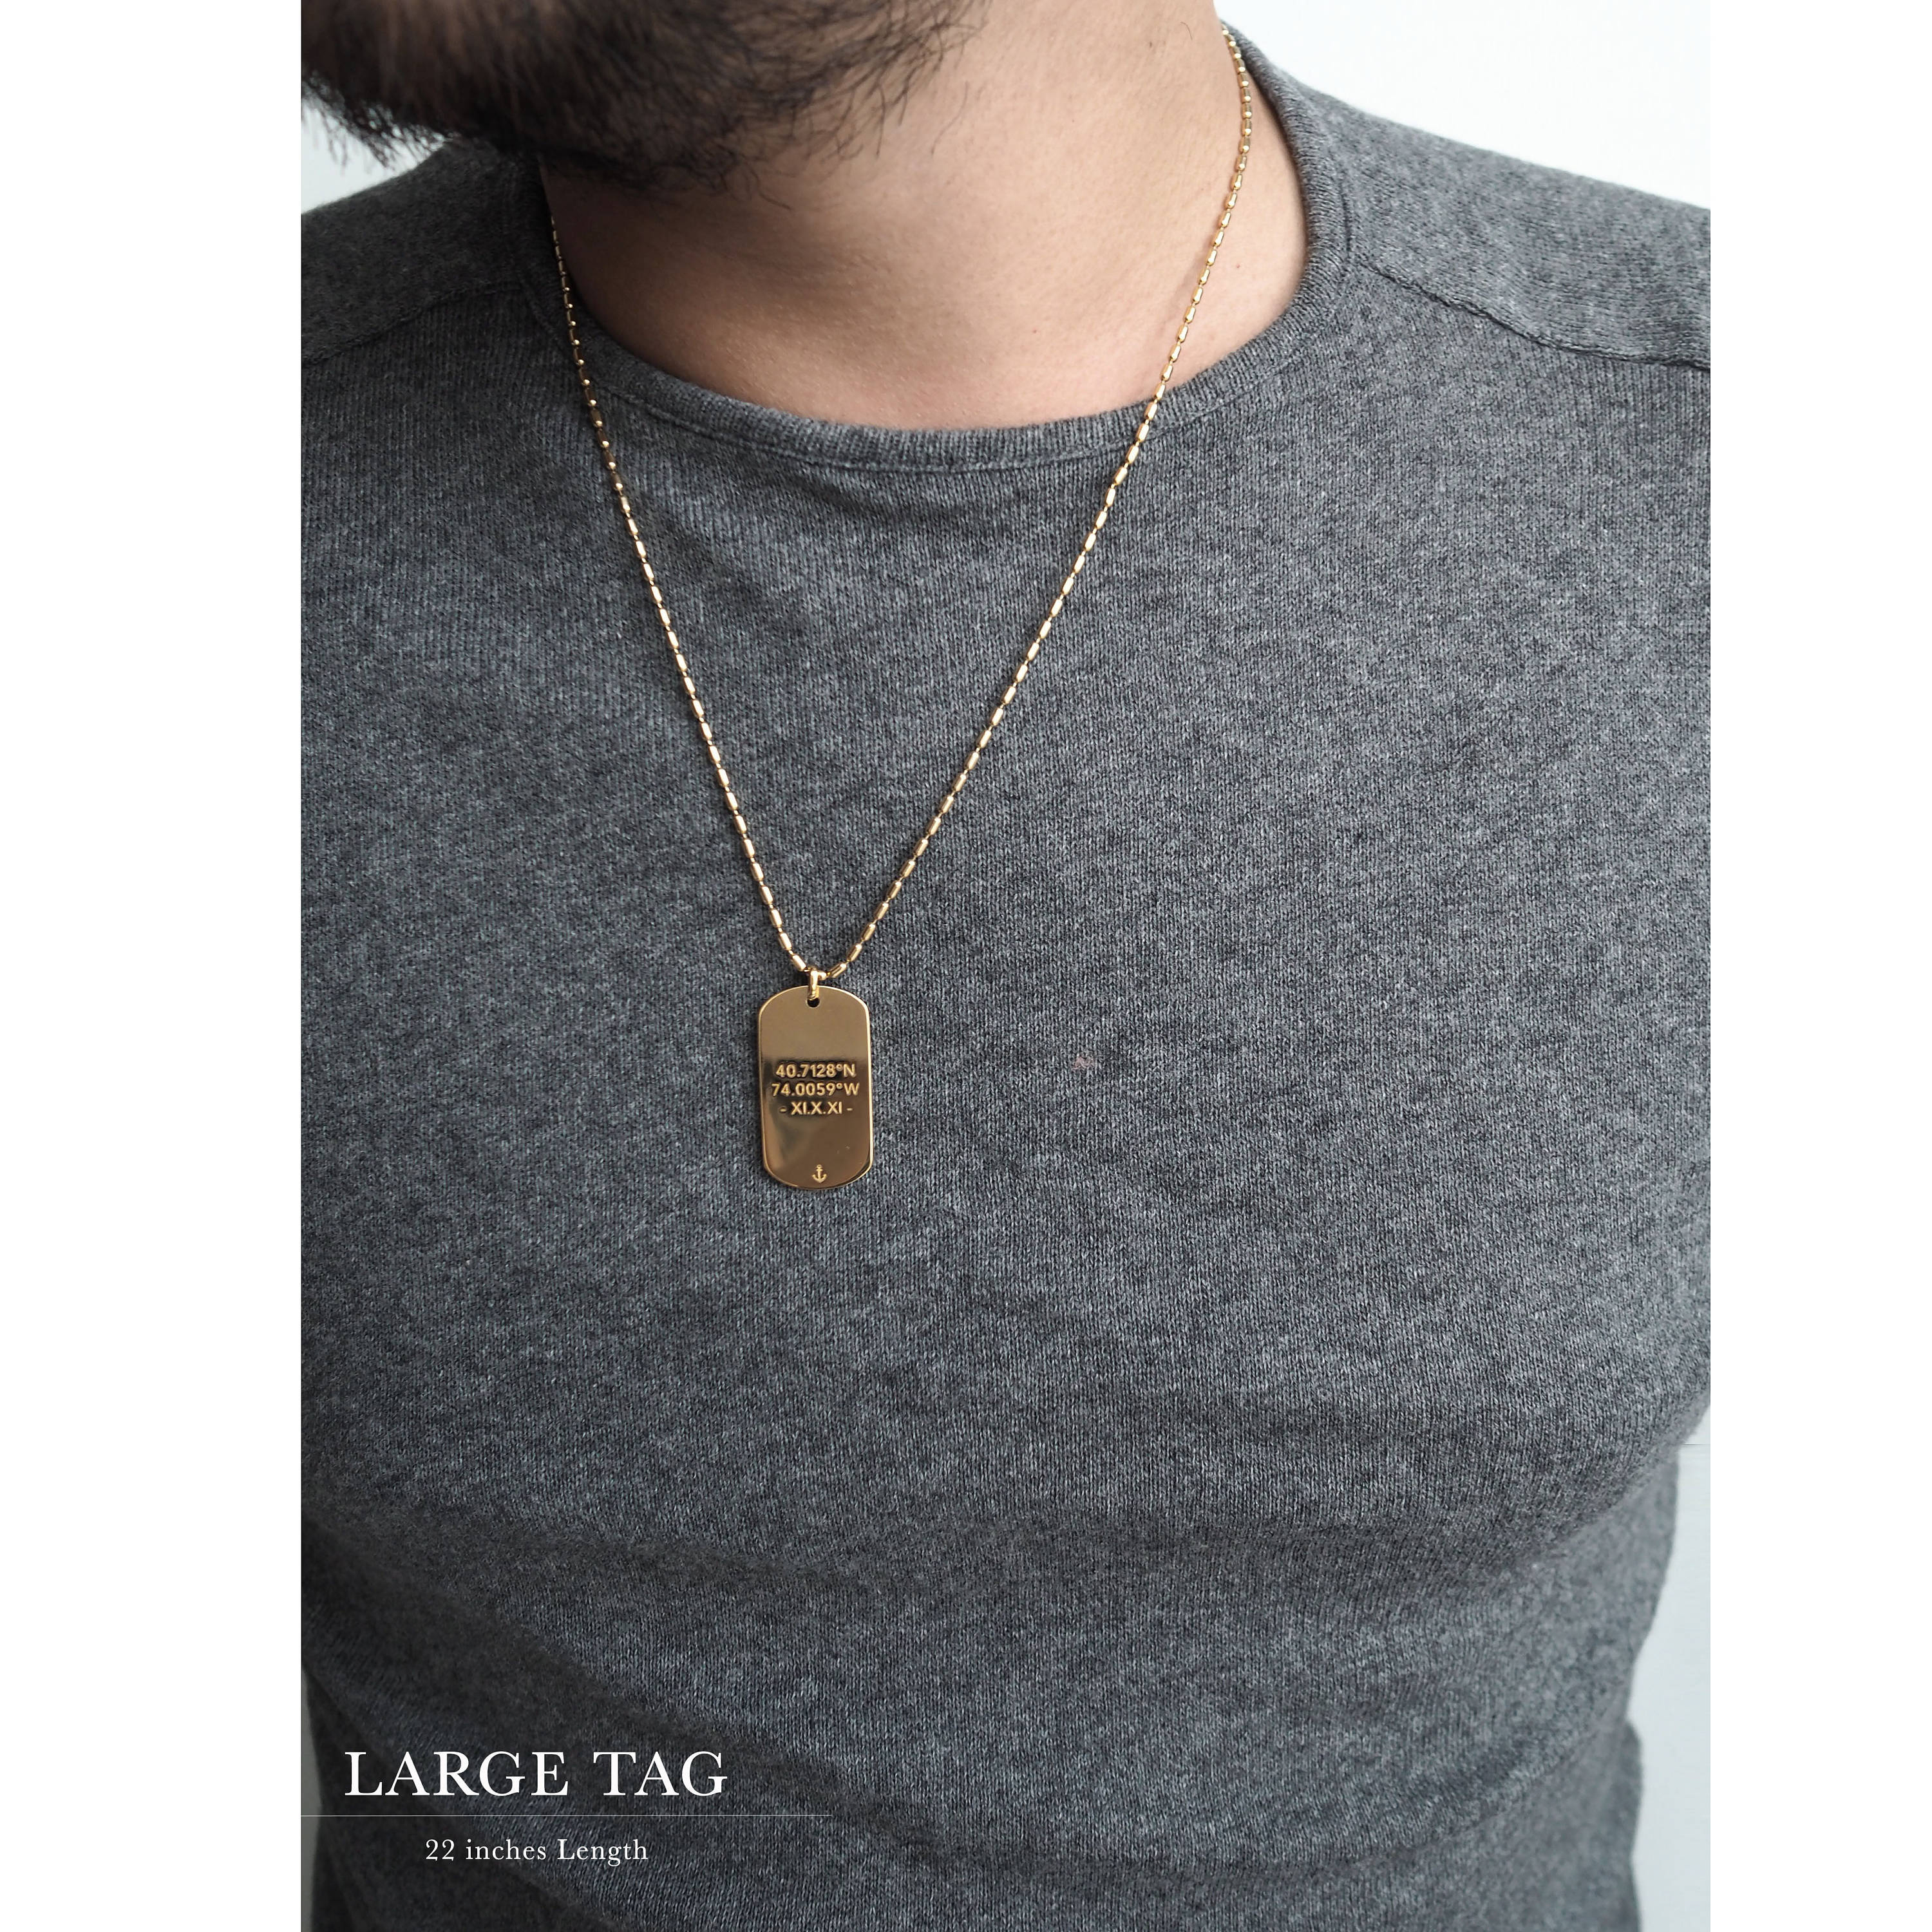 Necklace Length Diagram Name Necklace Length Diagram Wiring Library